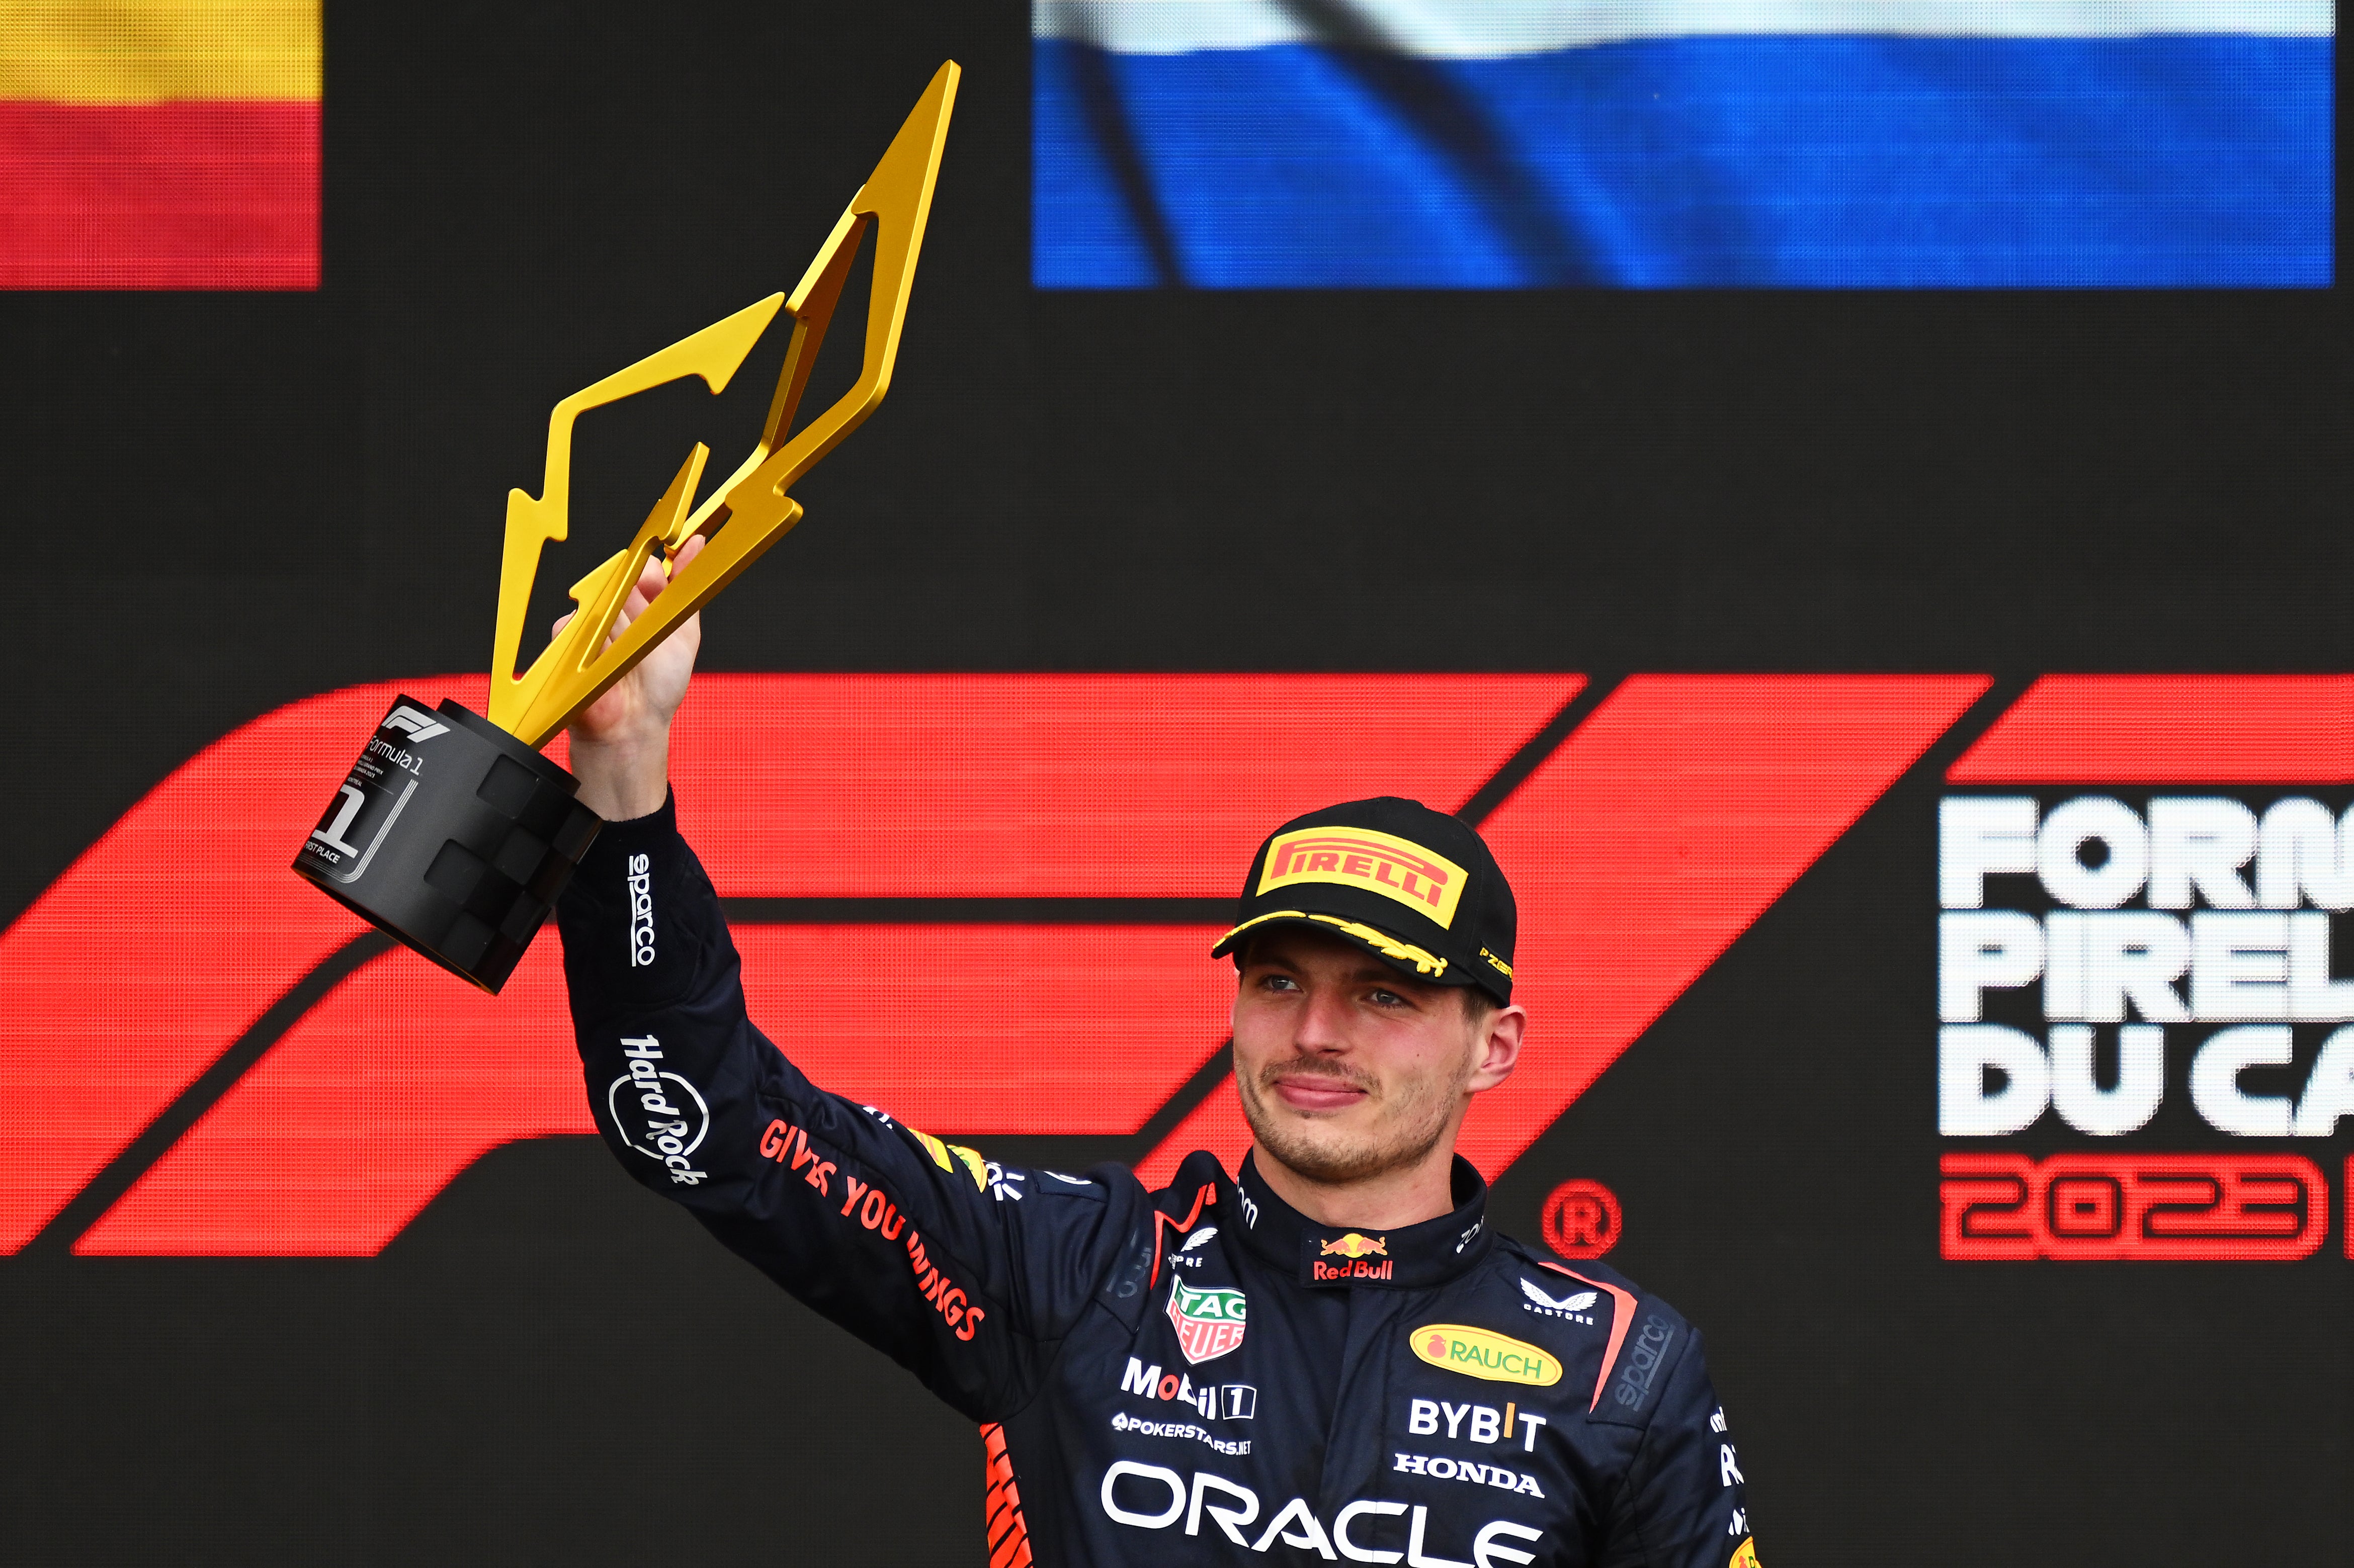 Max Verstappen claimed his 41st Formula 1 victory